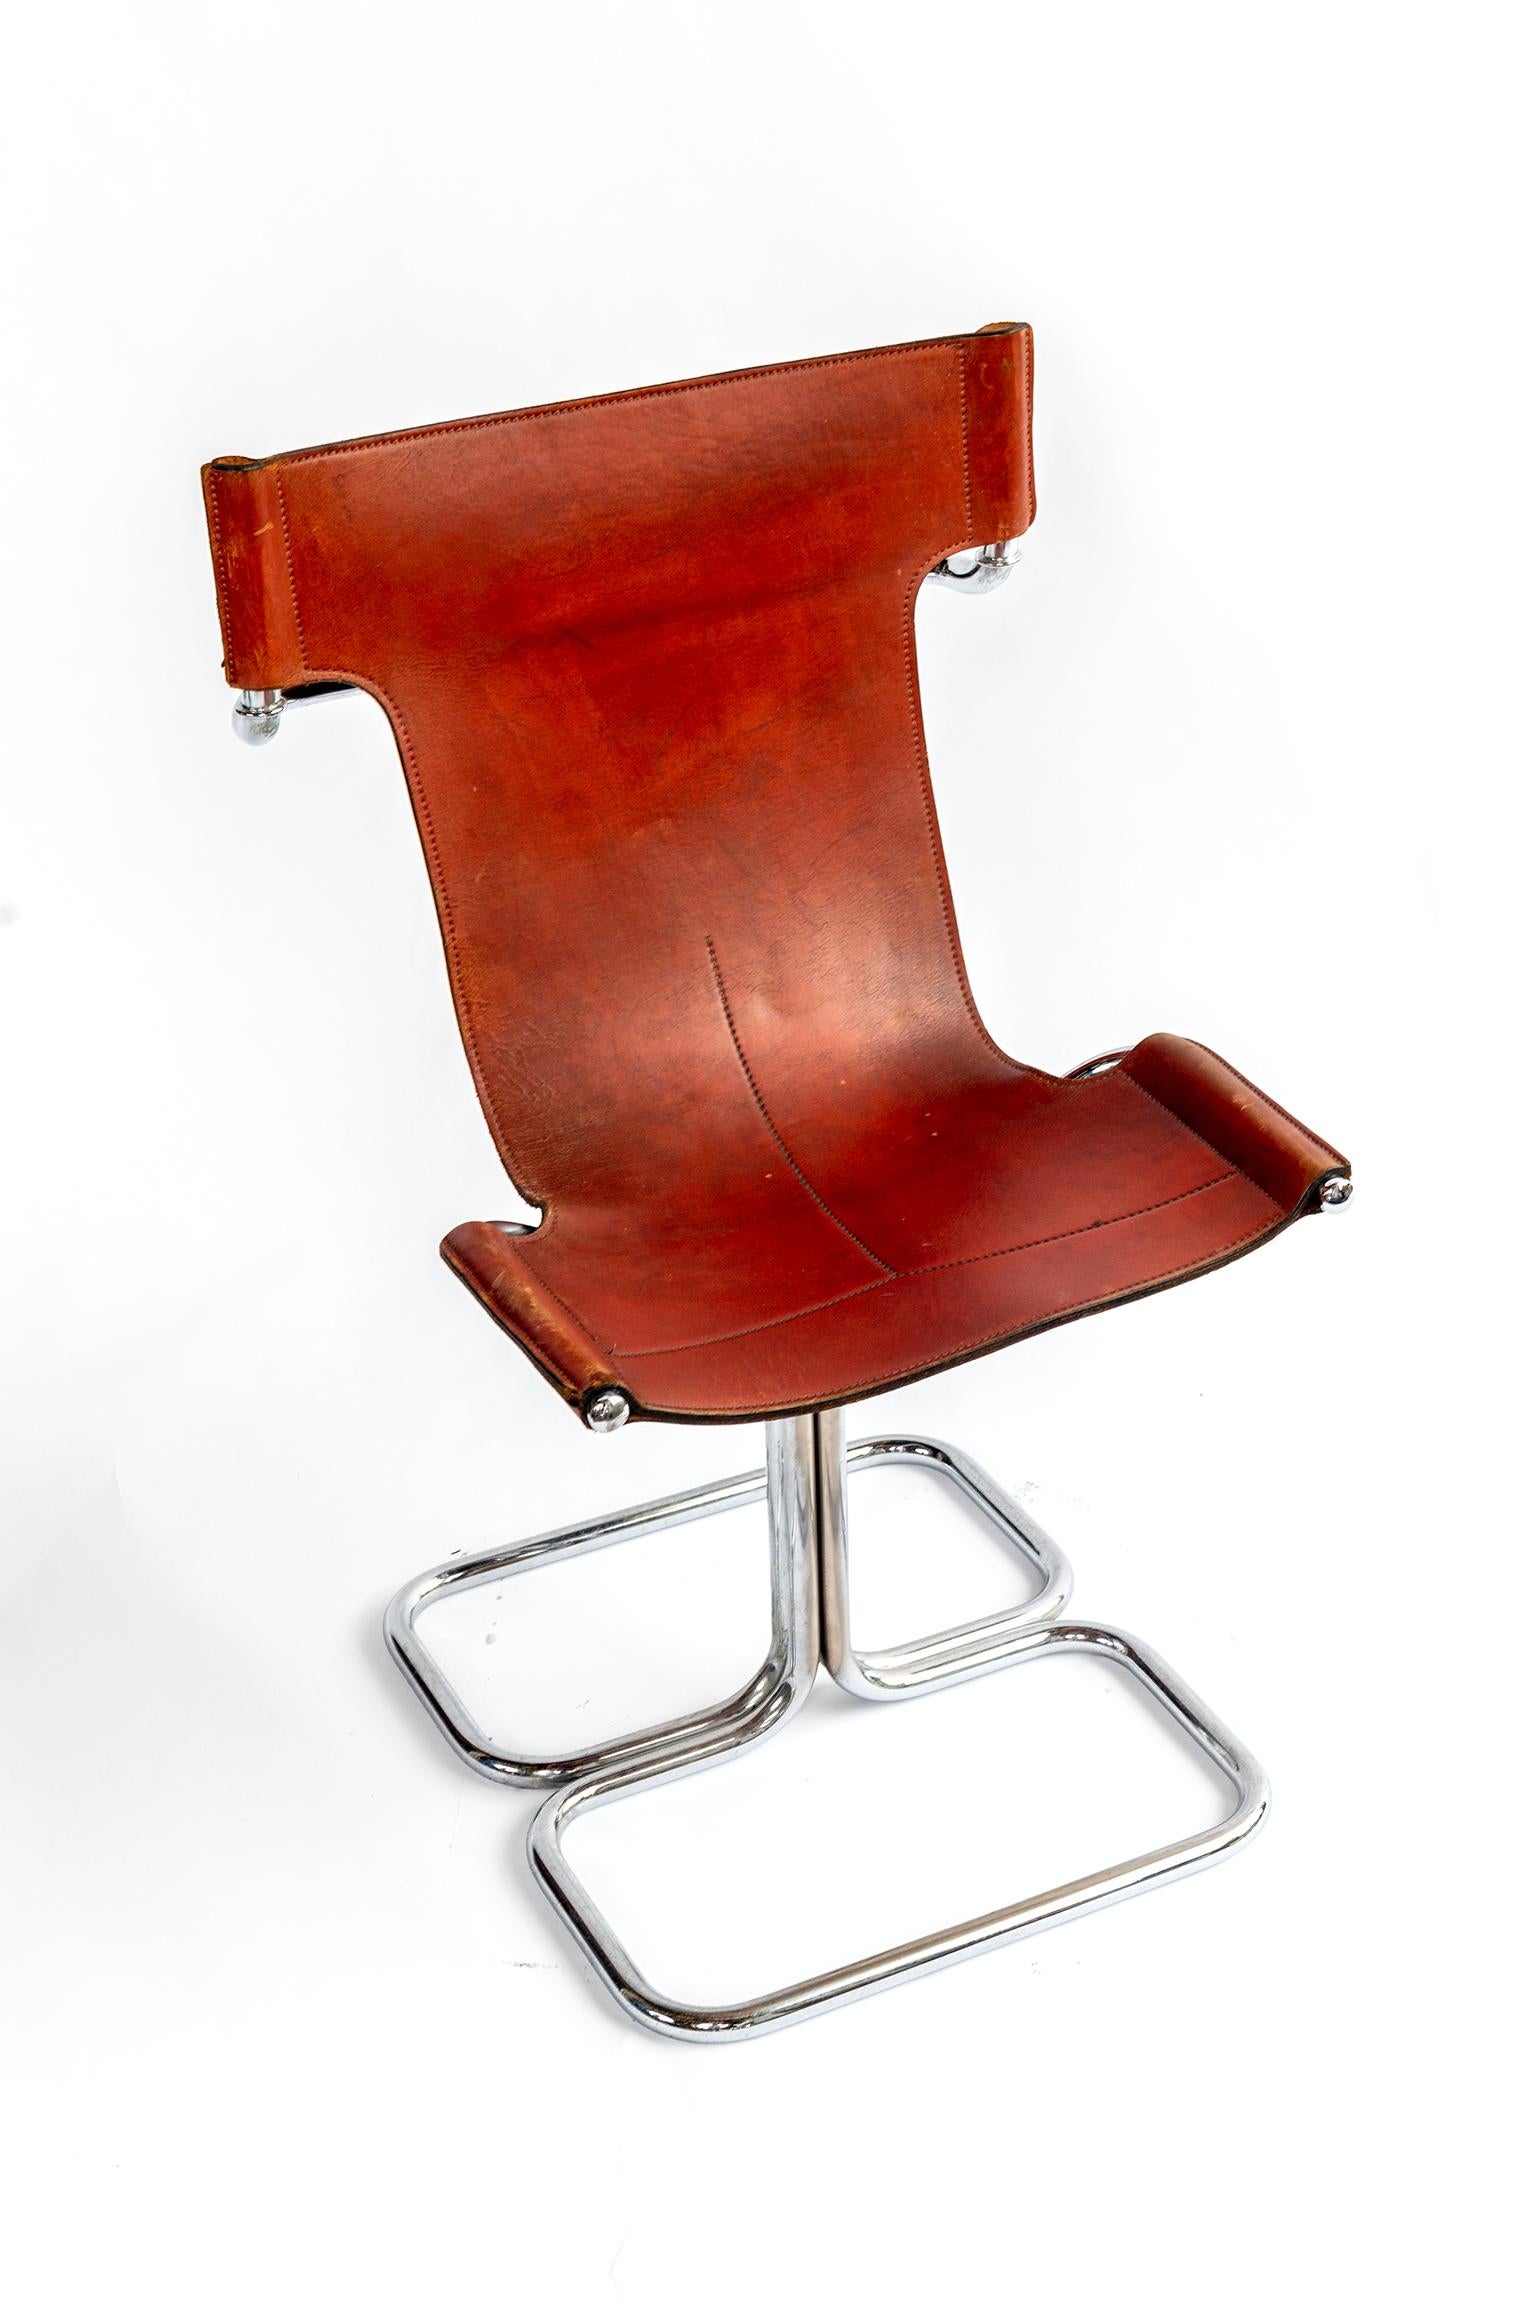 Italian Set of Four Mid-Century Modern T Chairs in Chrome and Cognac Leather. For Sale